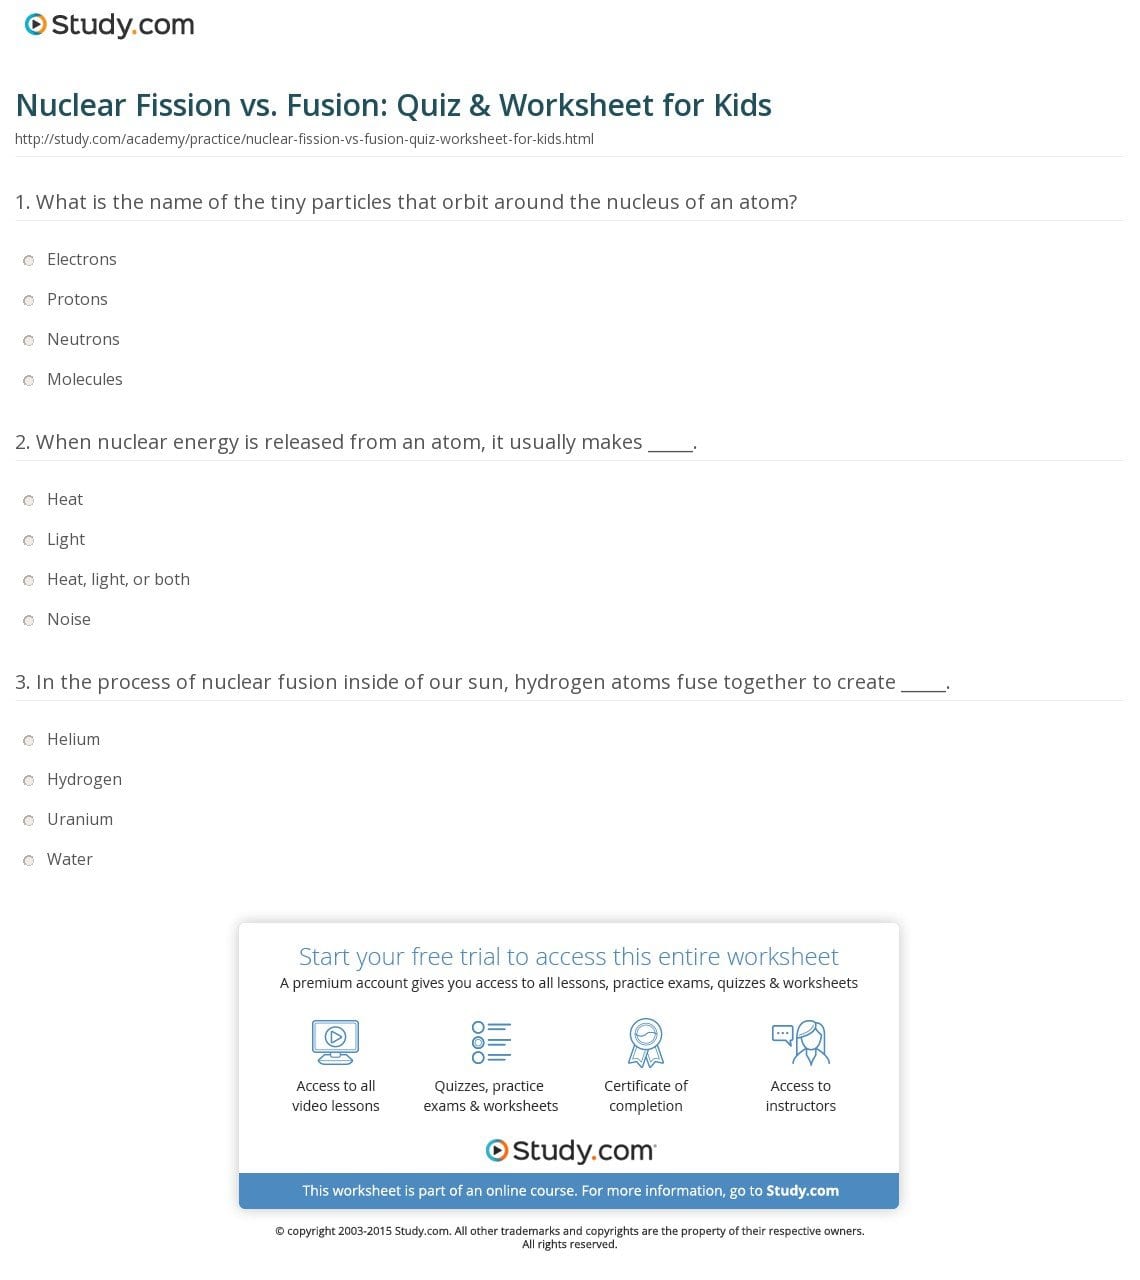 Nuclear Fission Vs Fusion Quiz  Worksheet For Kids  Study Together With Fission Versus Fusion Worksheet Answers